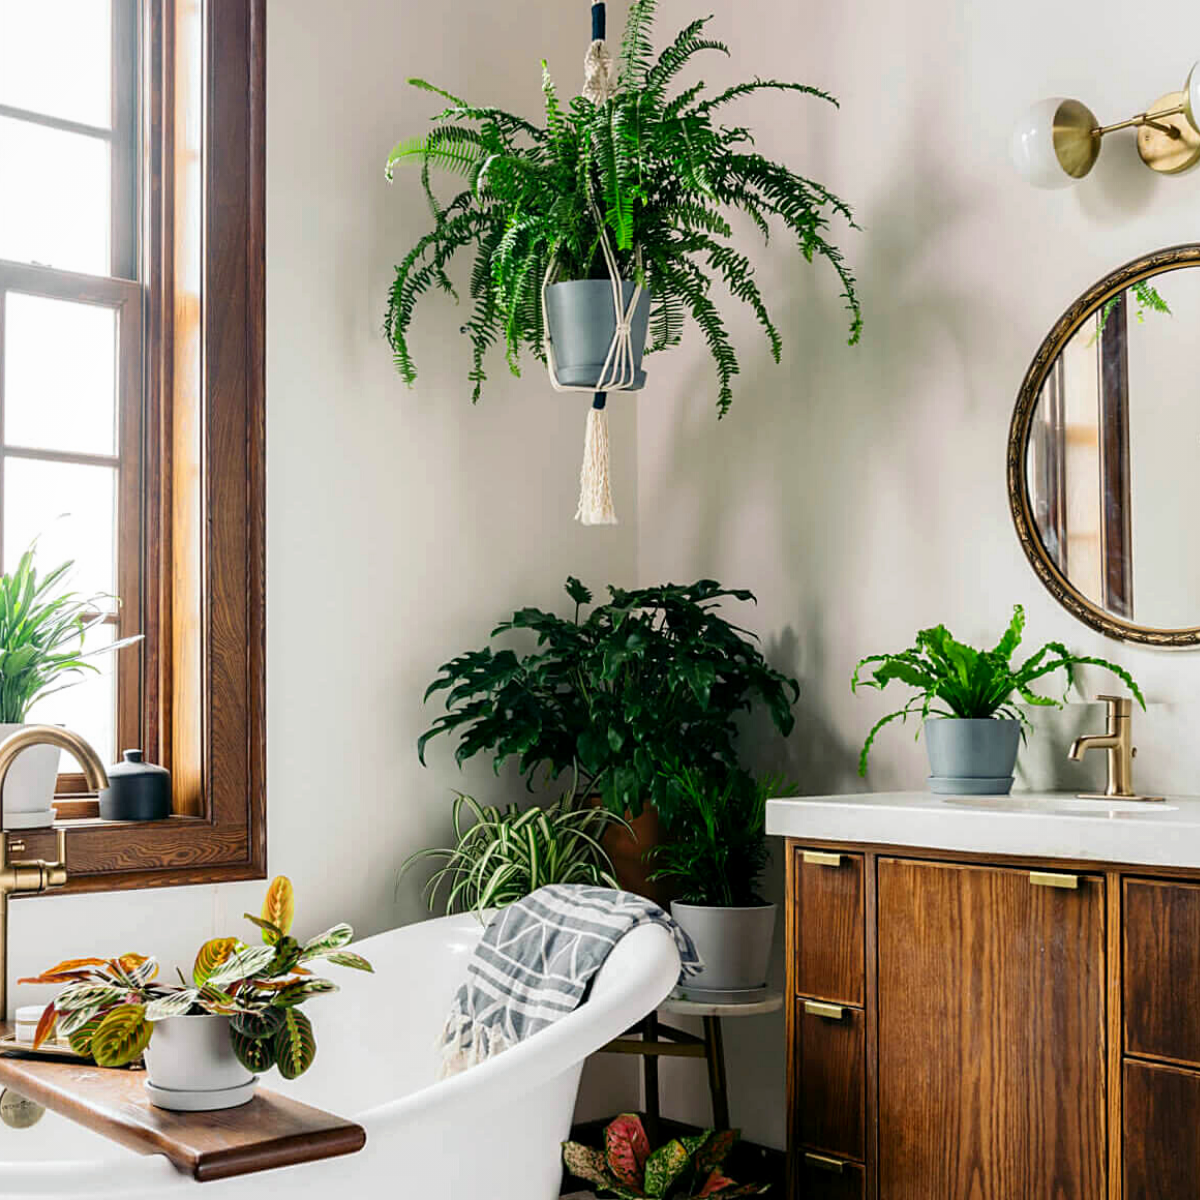 7-of-the-absolute-best-bathroom-plants-in-2022-featured